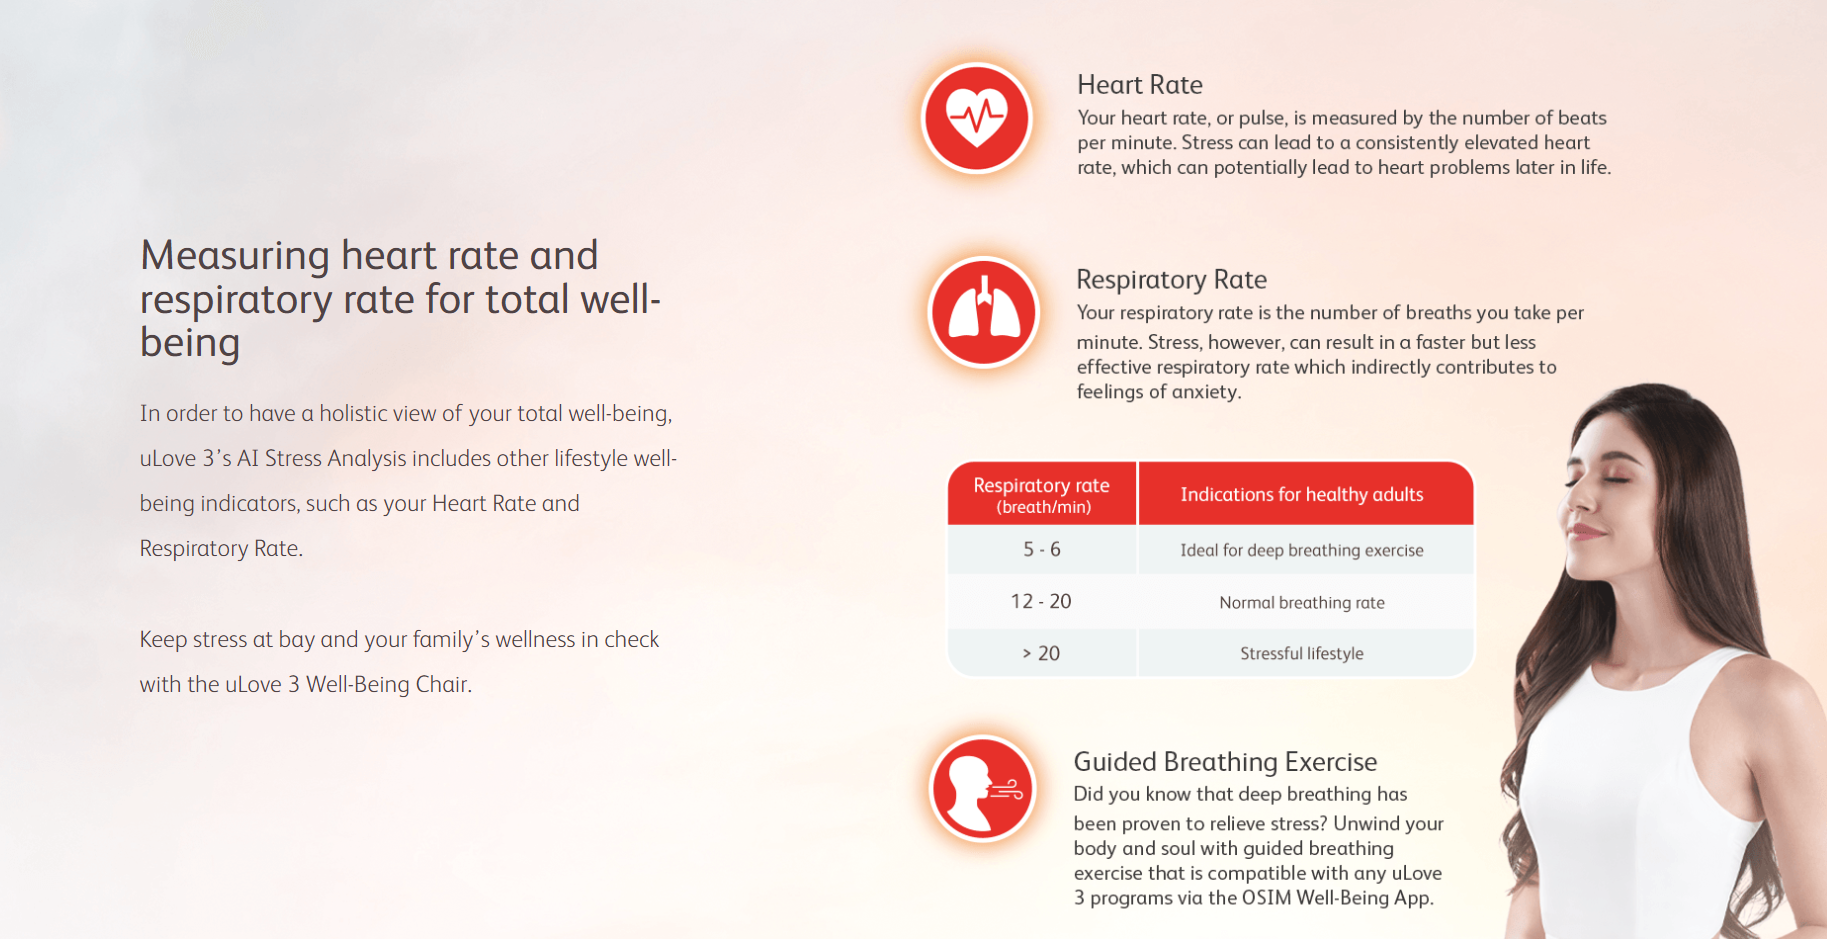 All the Information of the uLove 3 by OSIM measuring heart rate and respiratory rate for total well-being